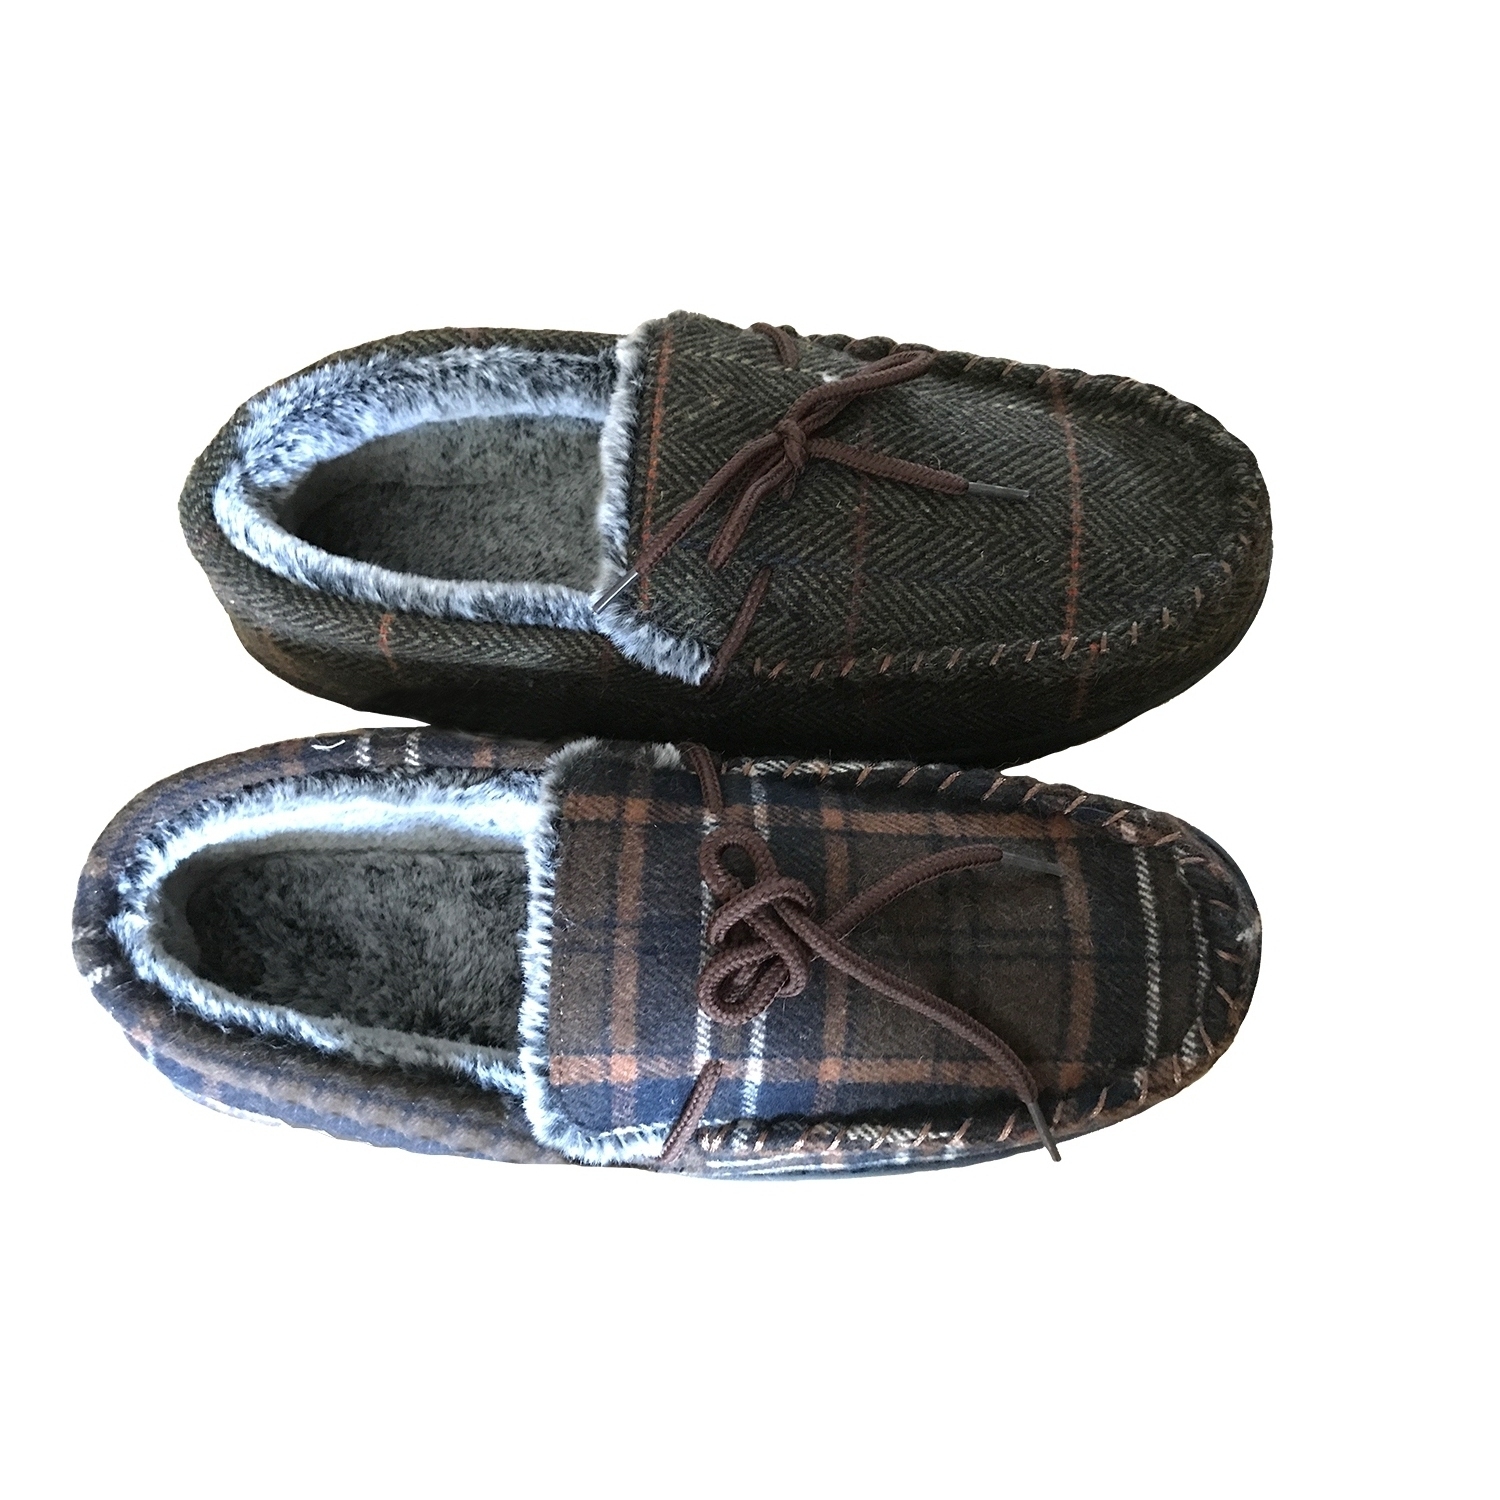 Men’s Moccasions With Memory Foam Slippers for Men Indoor Outdoor Featured Image